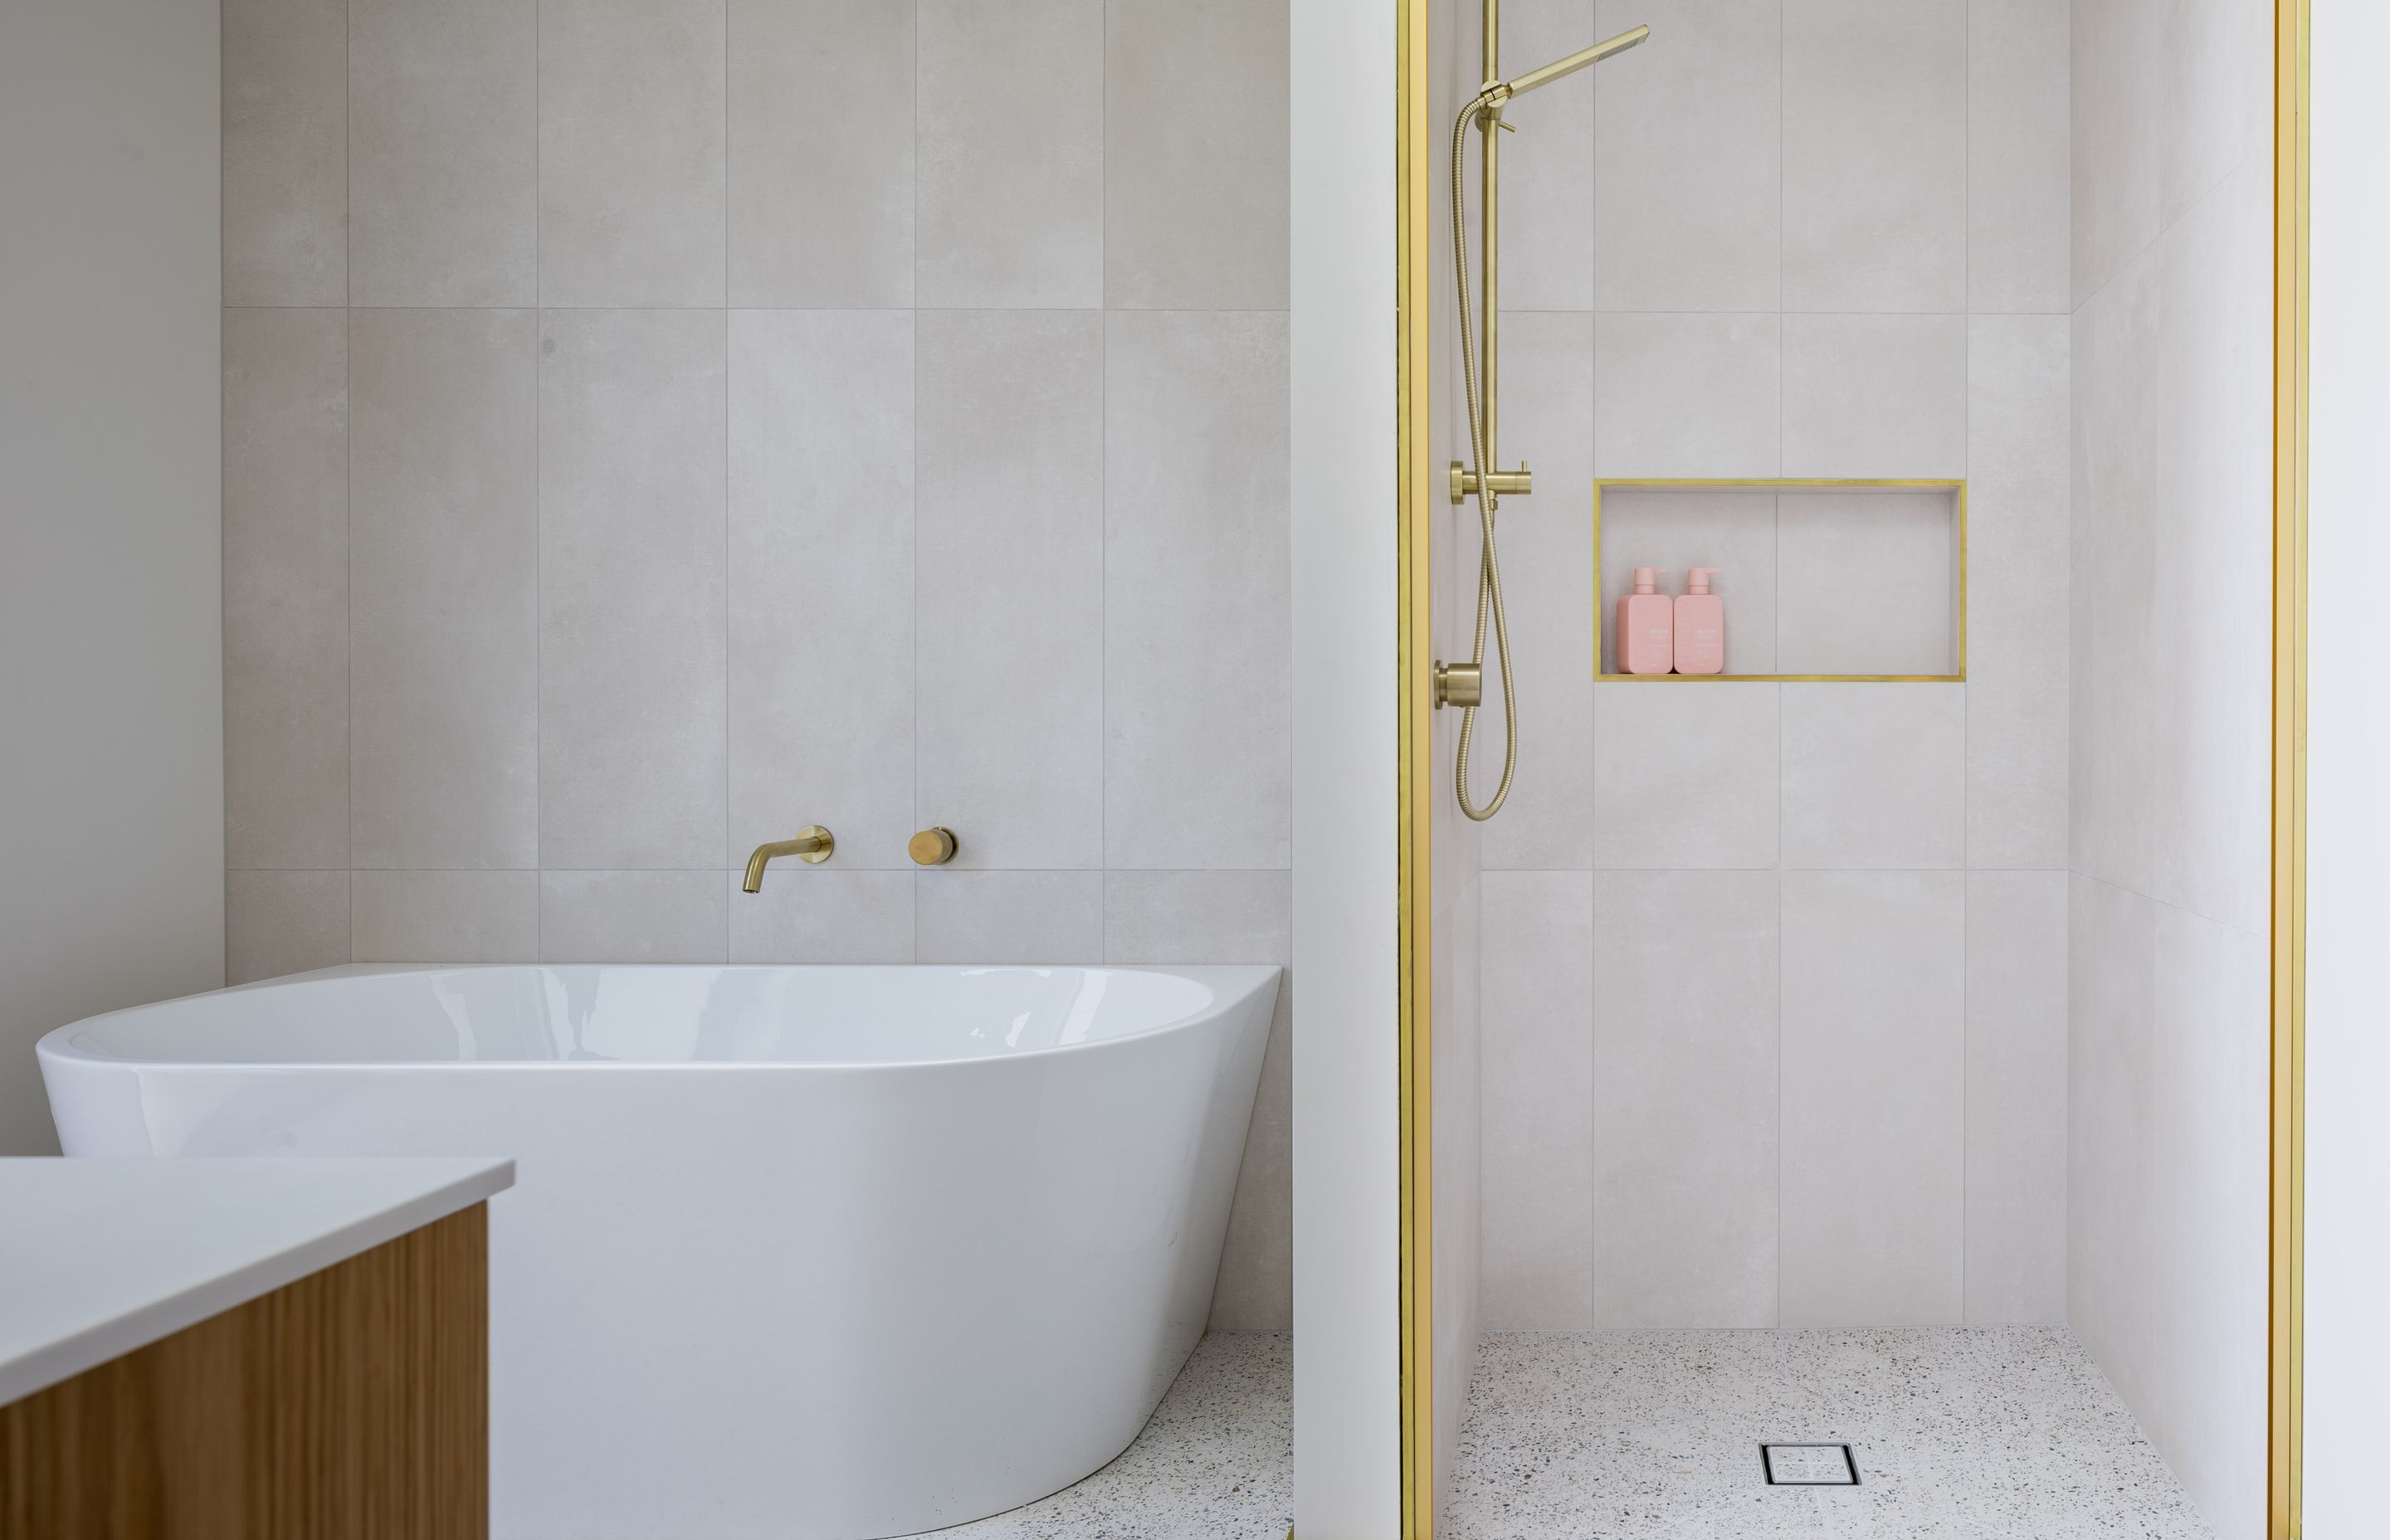 Natural tones and brass highlights create a luxurious aesthetic in the main bathroom.